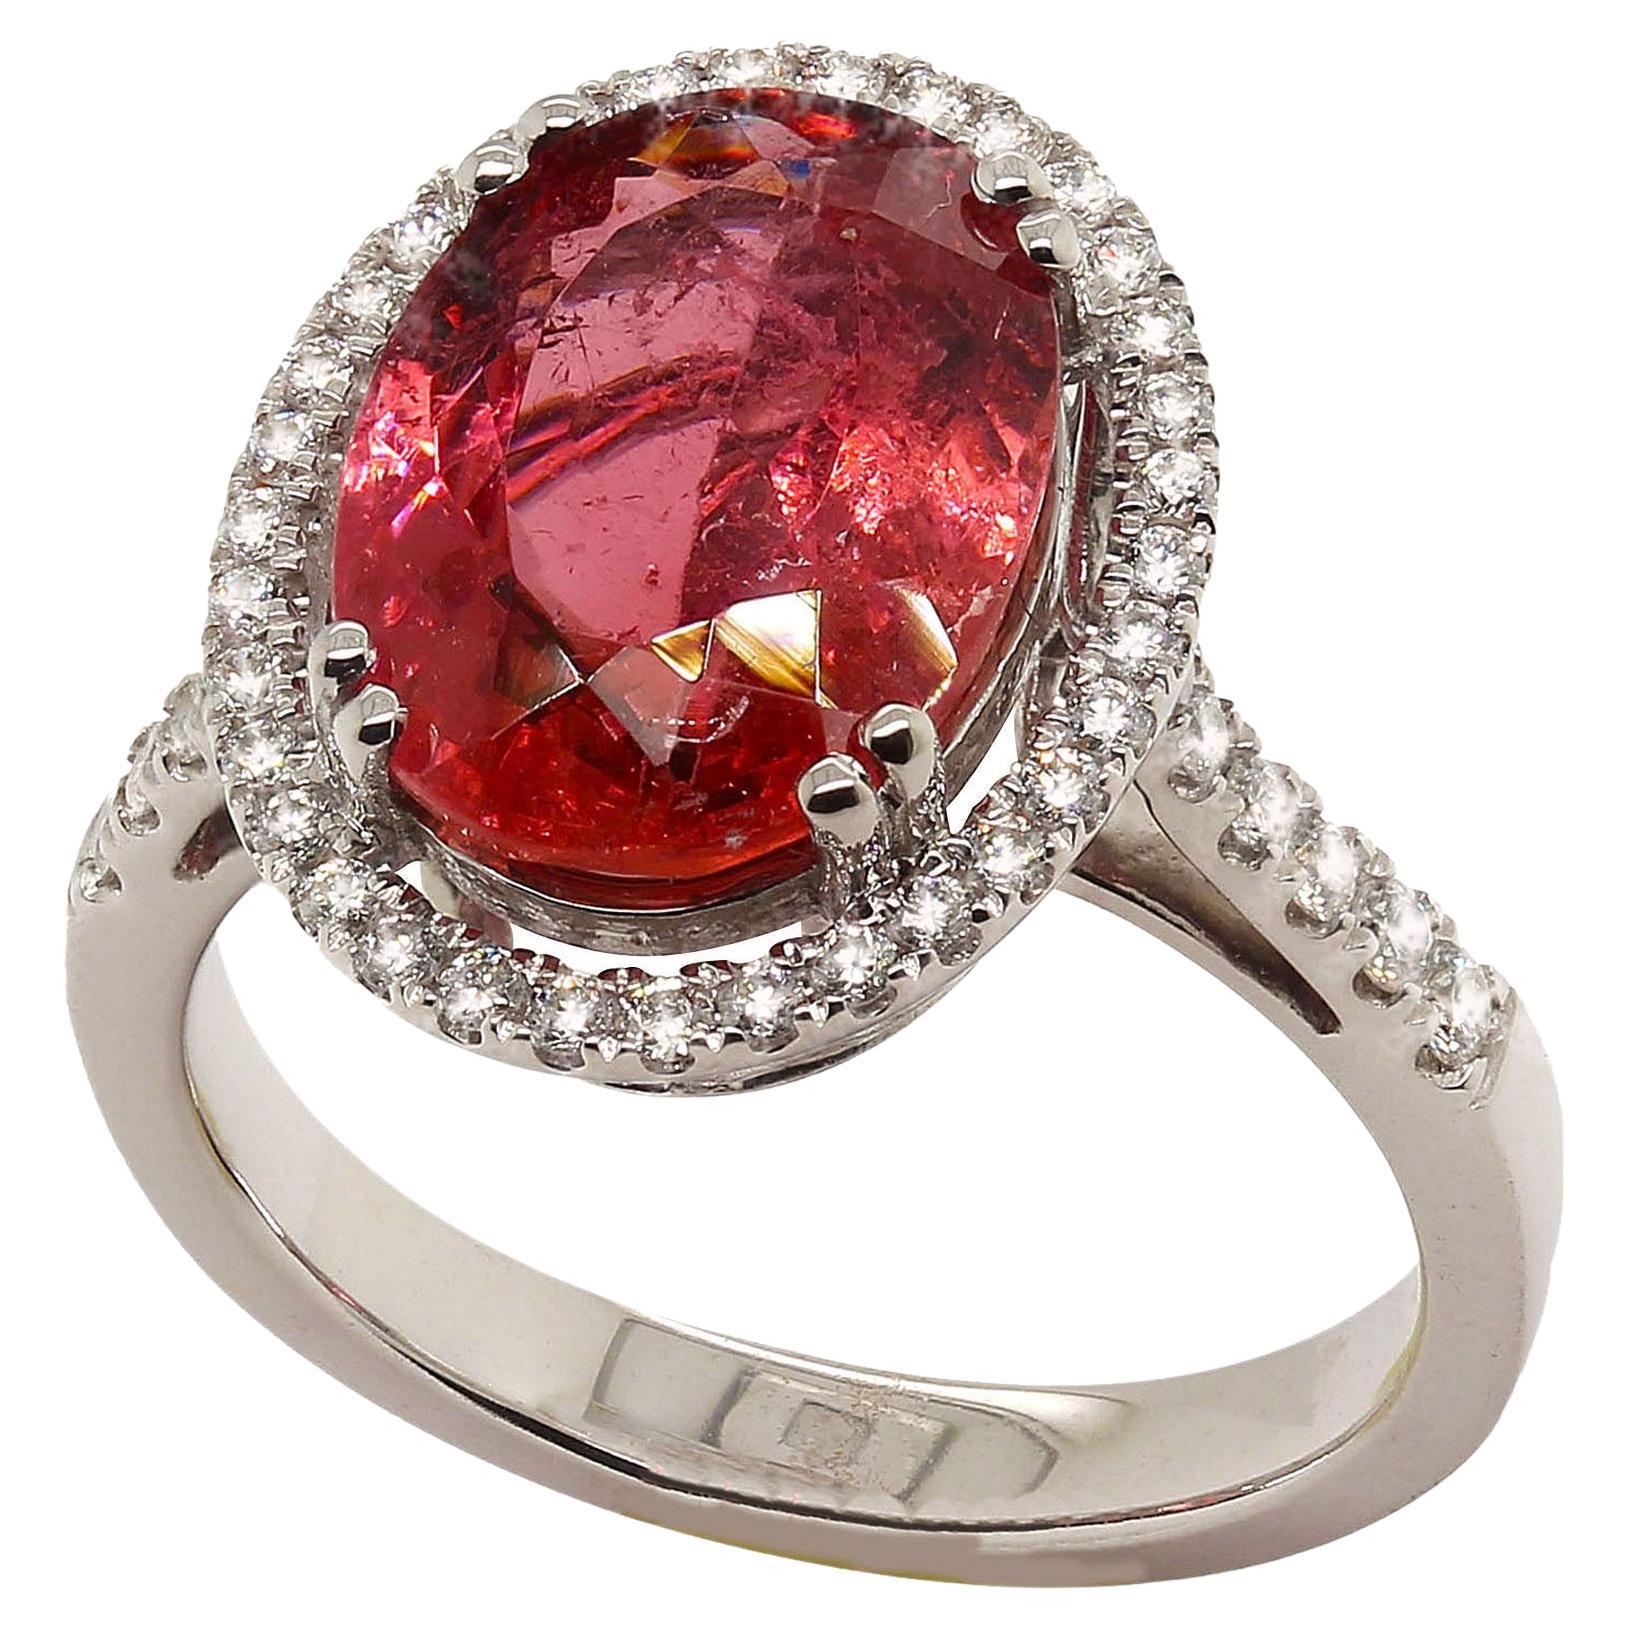 Lovely Dinner ring of Pink Tourmaline halo set with sparkling Diamonds and continue down the shank. Beautiful hand made 14K white gold setting is a sizable 6.75.  See your local jeweler for sizing. The Brazilian Pink Tourmaline comes from one of our